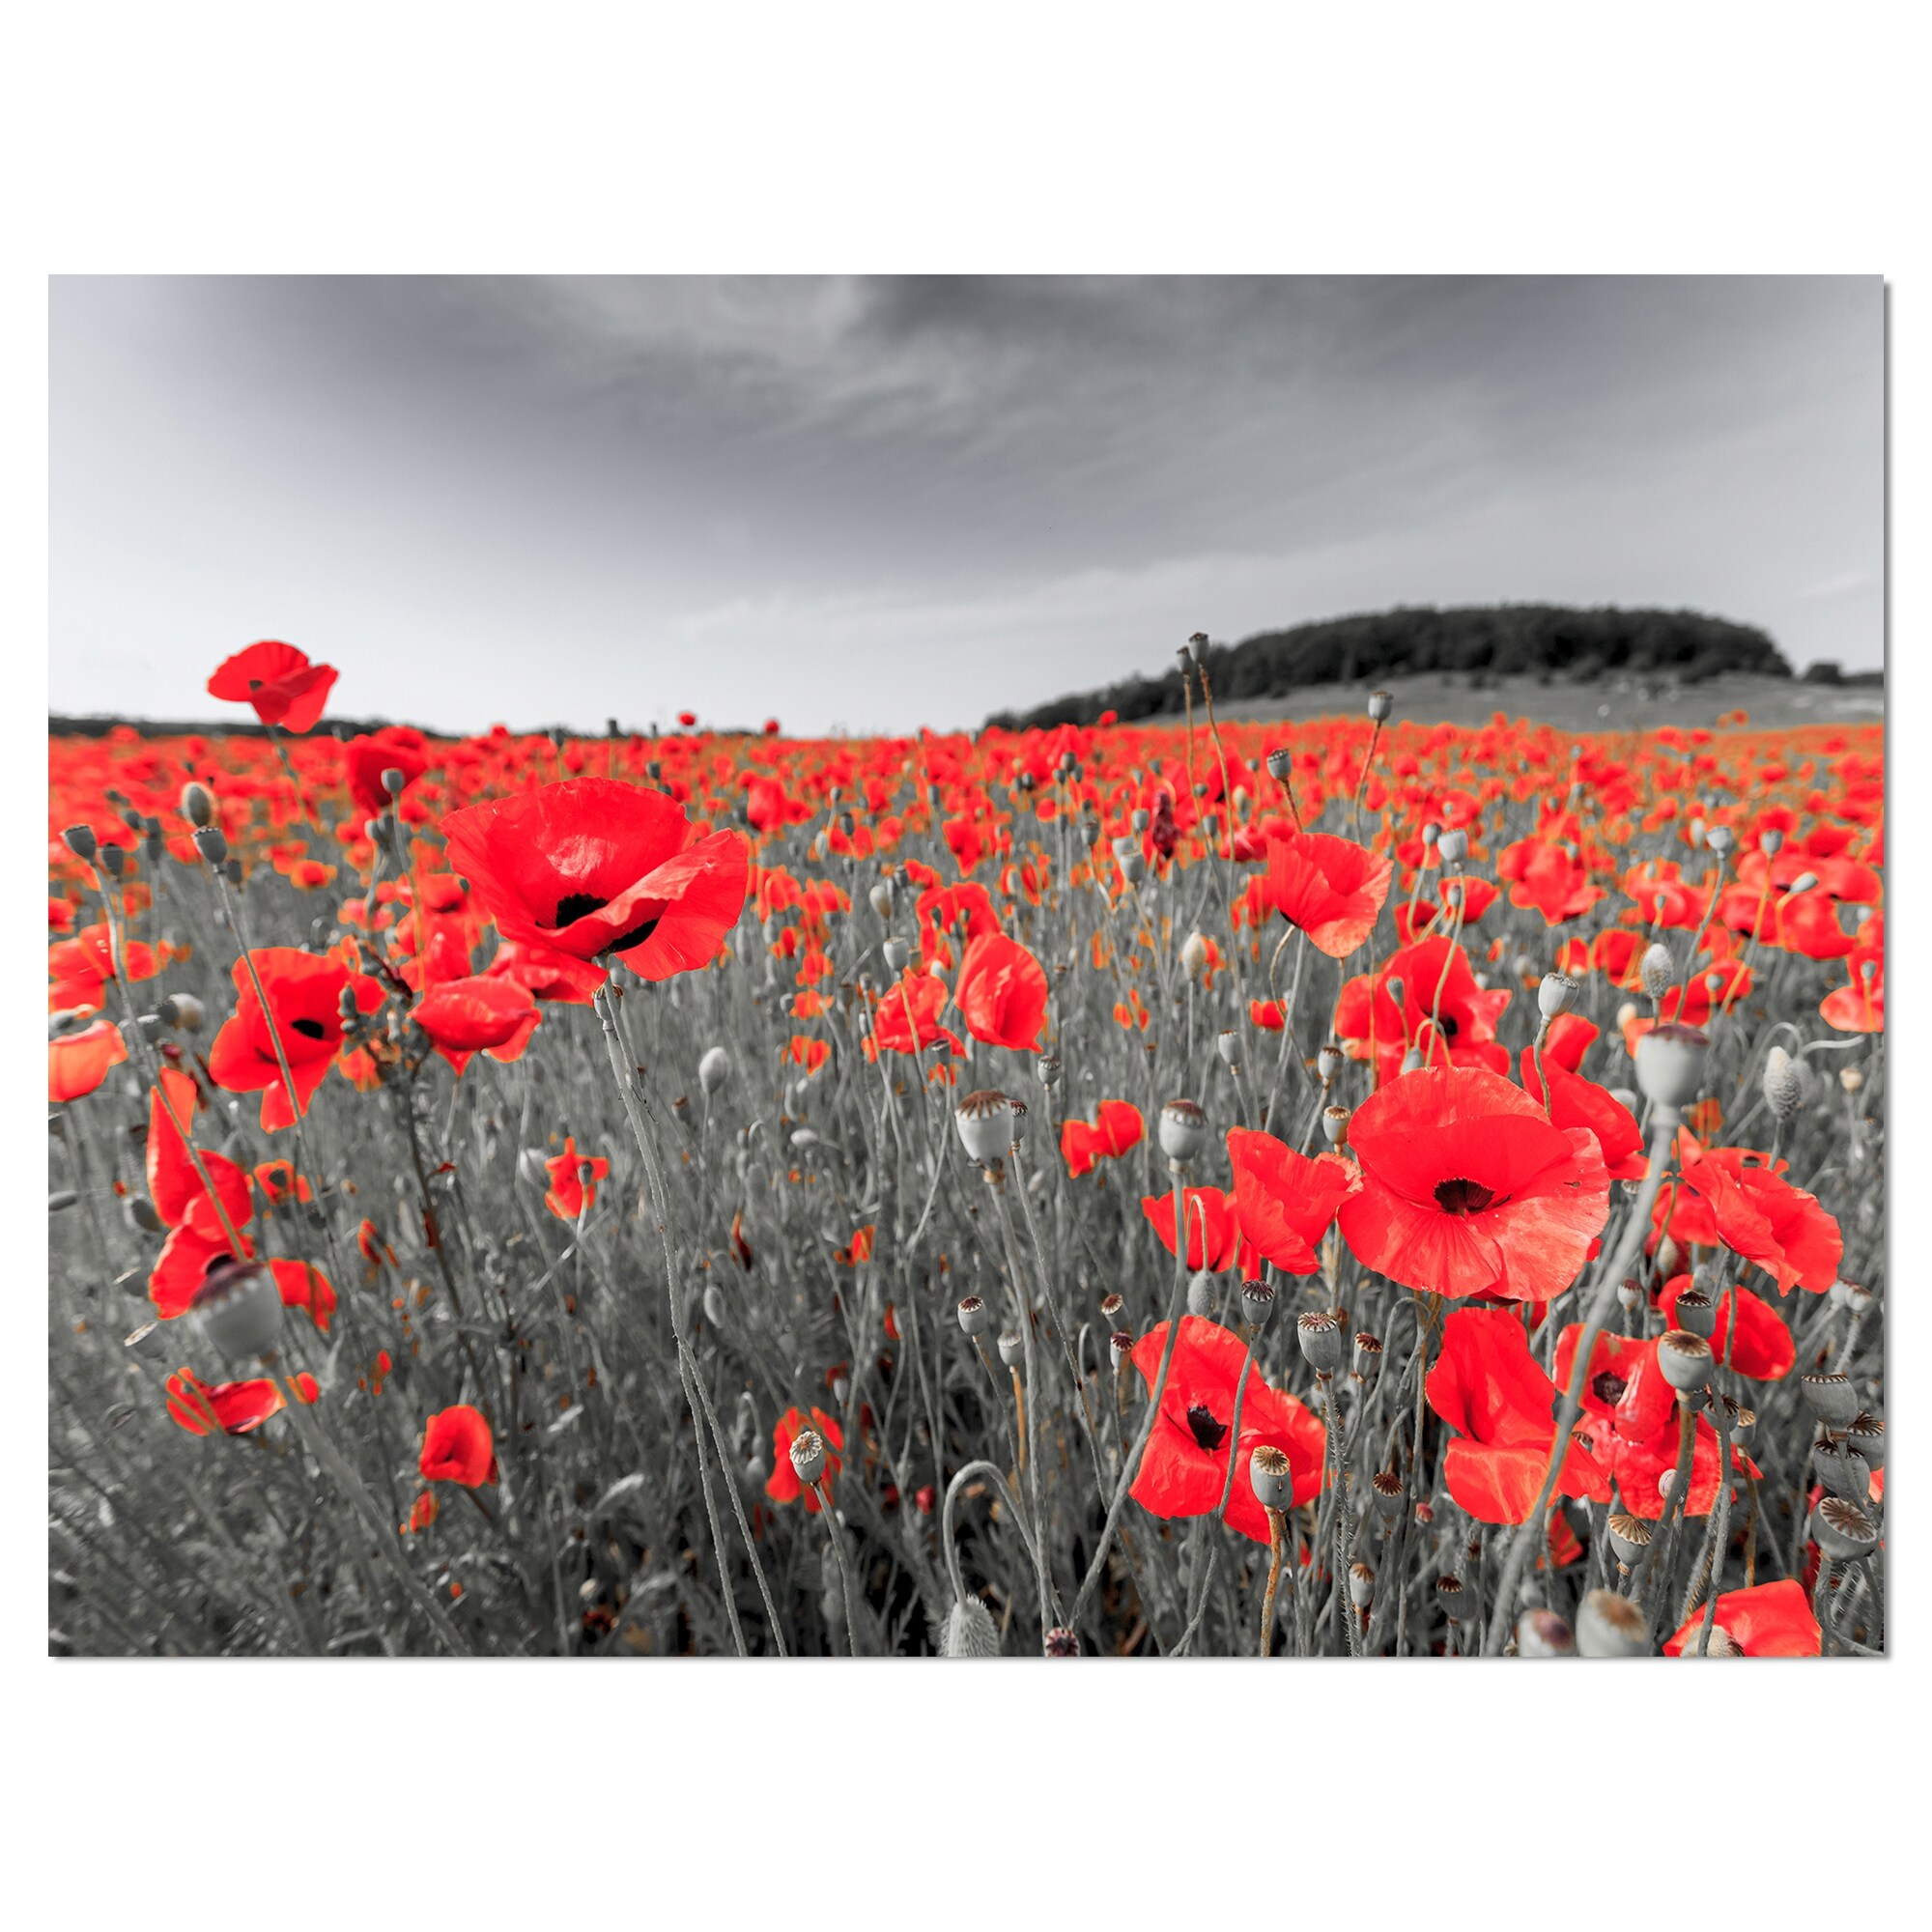 https://ak1.ostkcdn.com/images/products/is/images/direct/98984e51c34387ddd3c4fd79b87c1933f1d3cb9c/Designart-%27Red-Poppies-Field%27-Landscapes-Floral-Photographic-on-wrapped-Canvas.jpg